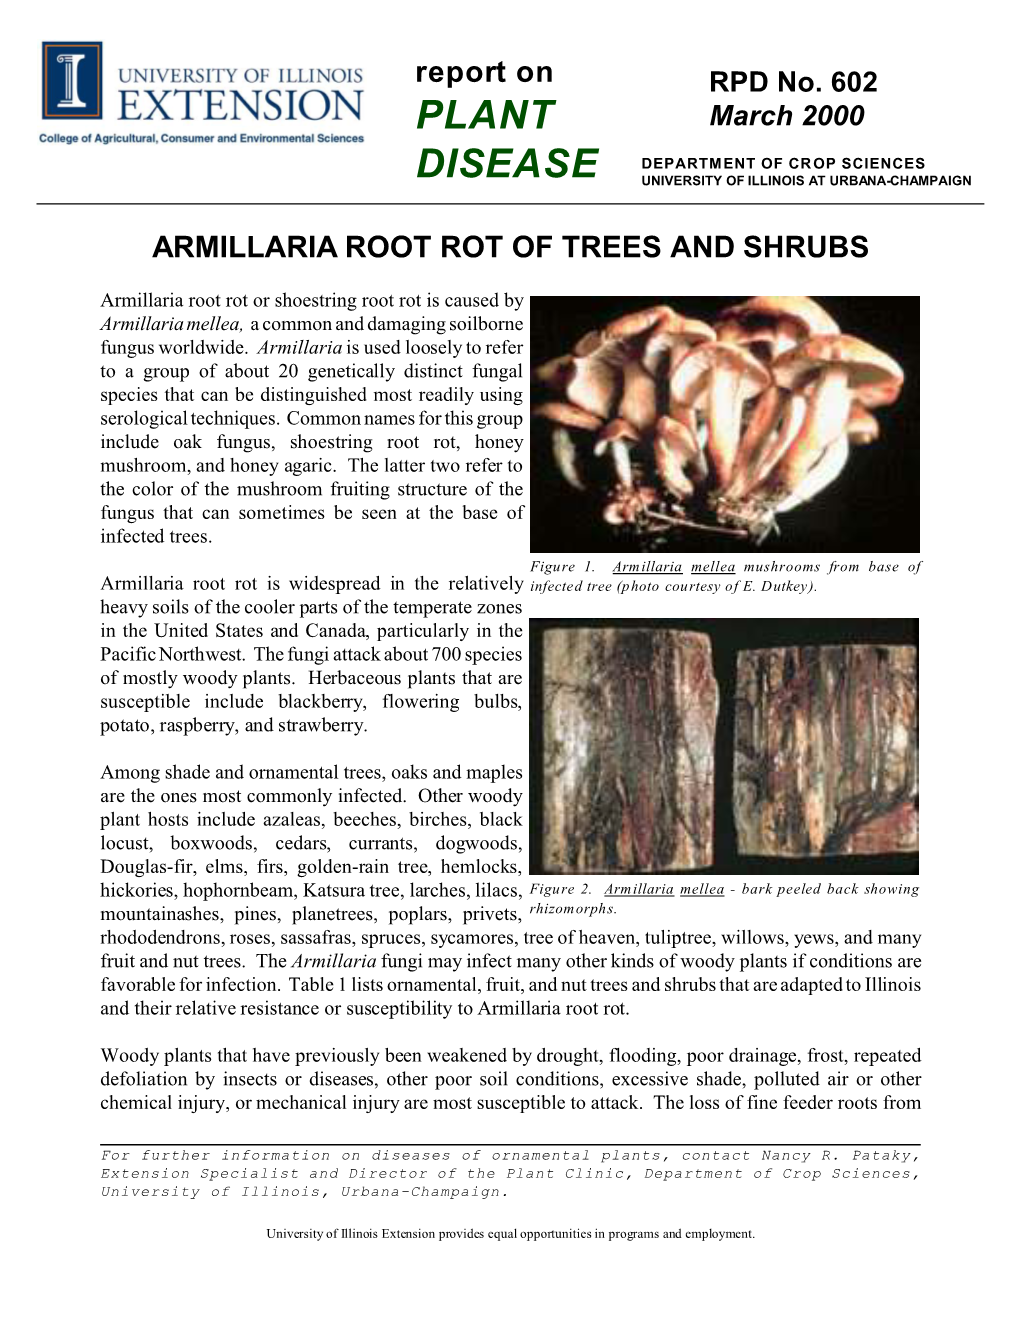 Armillaria Root Rot of Treees and Shrubs, RPD No